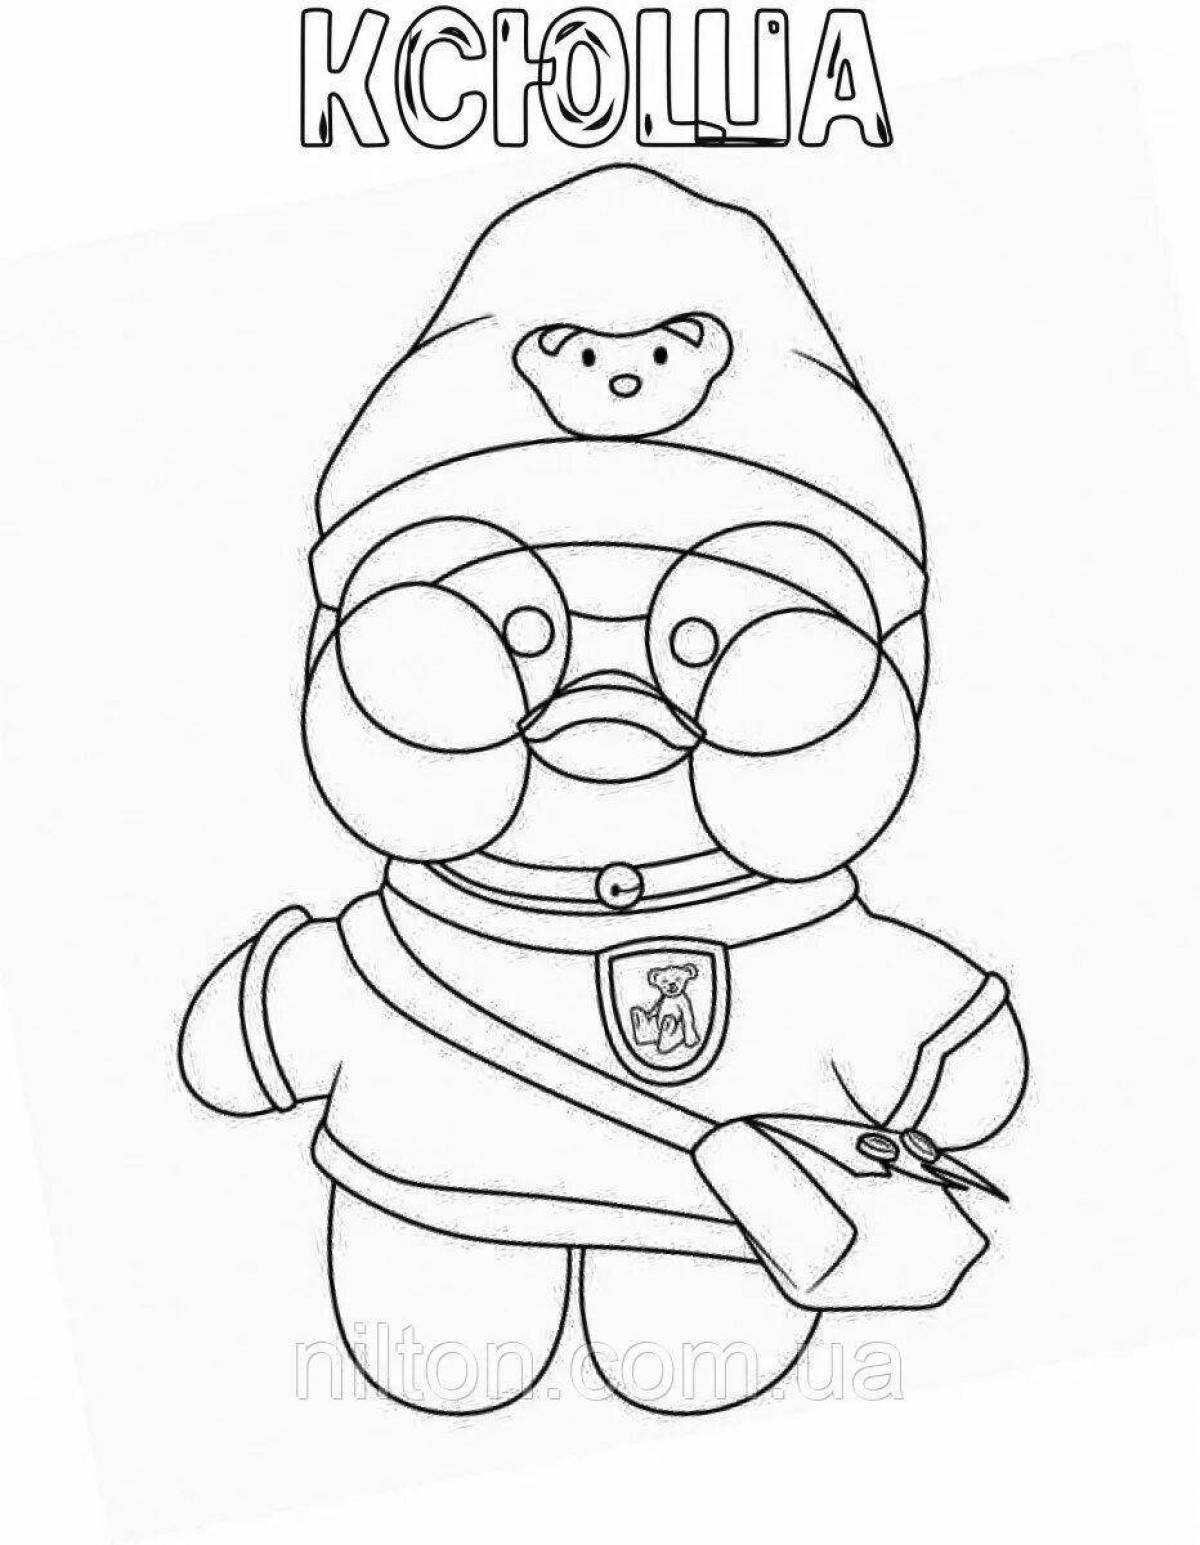 Color-frenzy fanfan duck coloring page